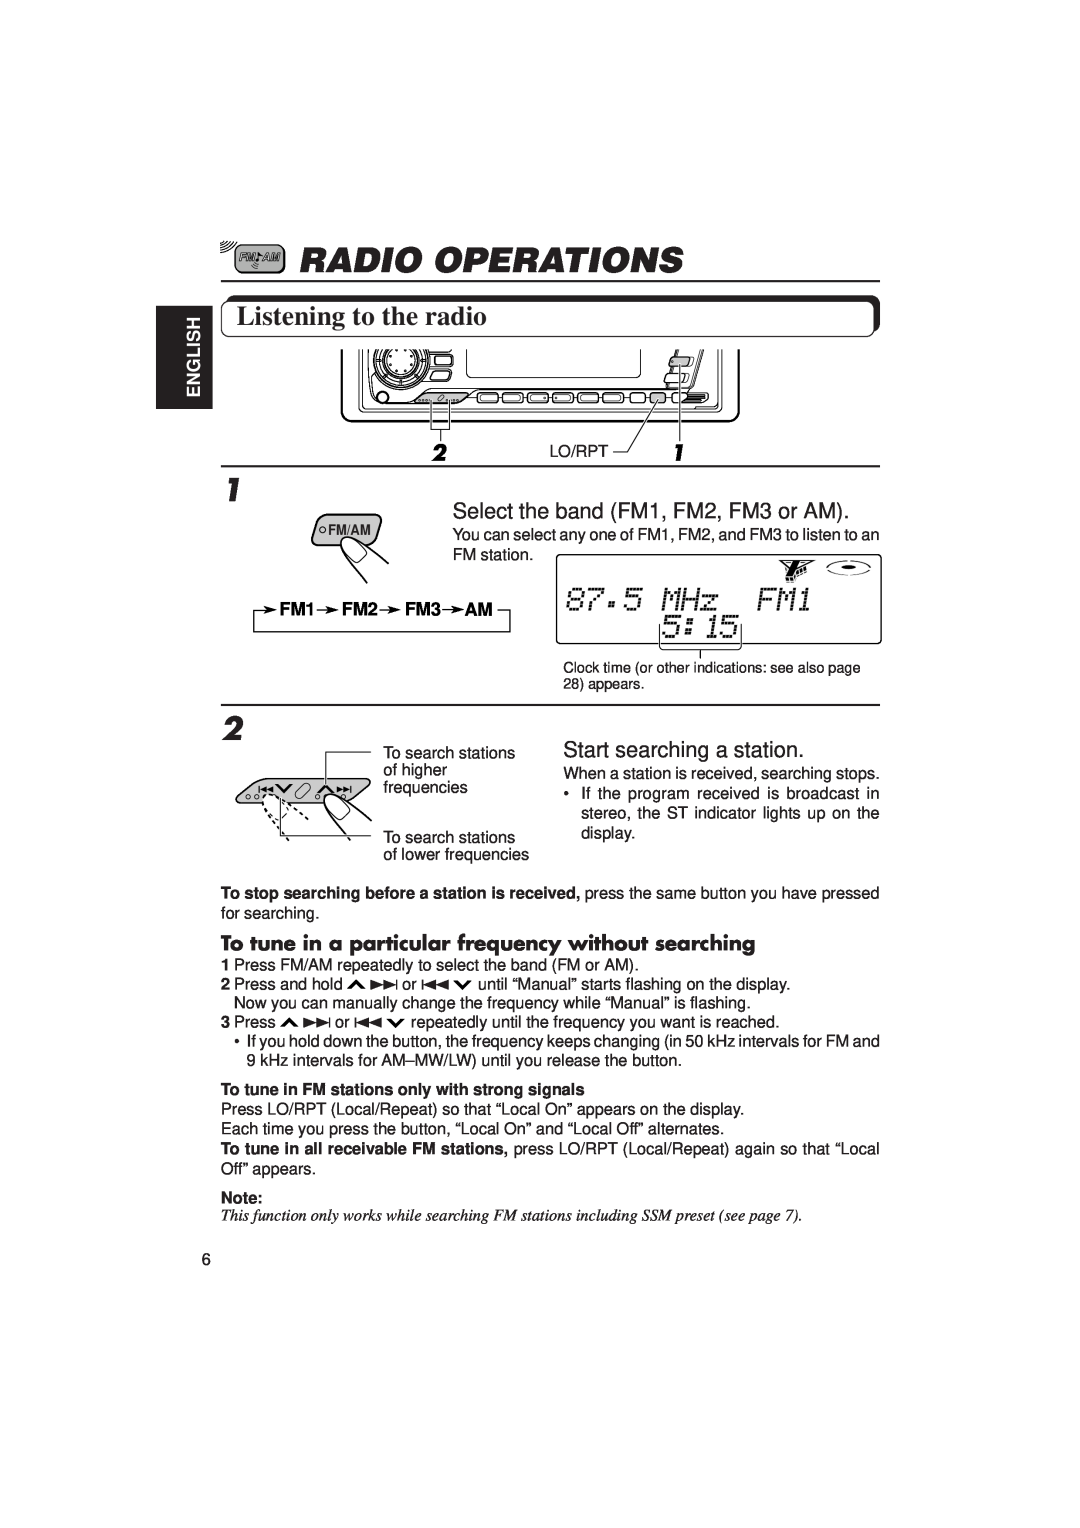 JVC KD-SX1500R Radio Operations, Listening to the radio, Select the band FM1, FM2, FM3 or AM, Start searching a station 